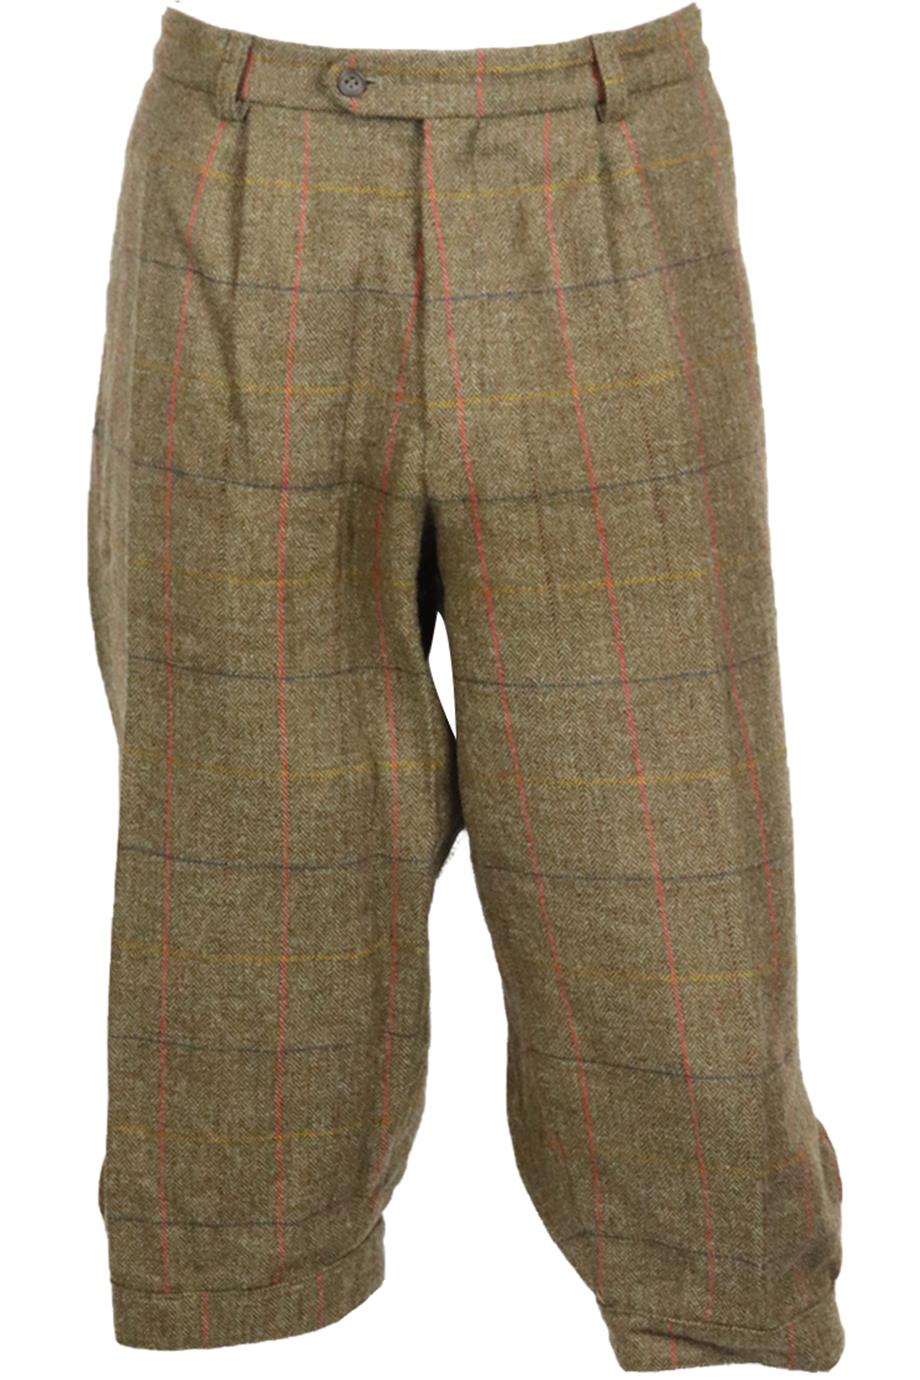 WILLIAM AND SON MEN'S CHECKED WOOL BLEND TWEED PANTS XXLARGE